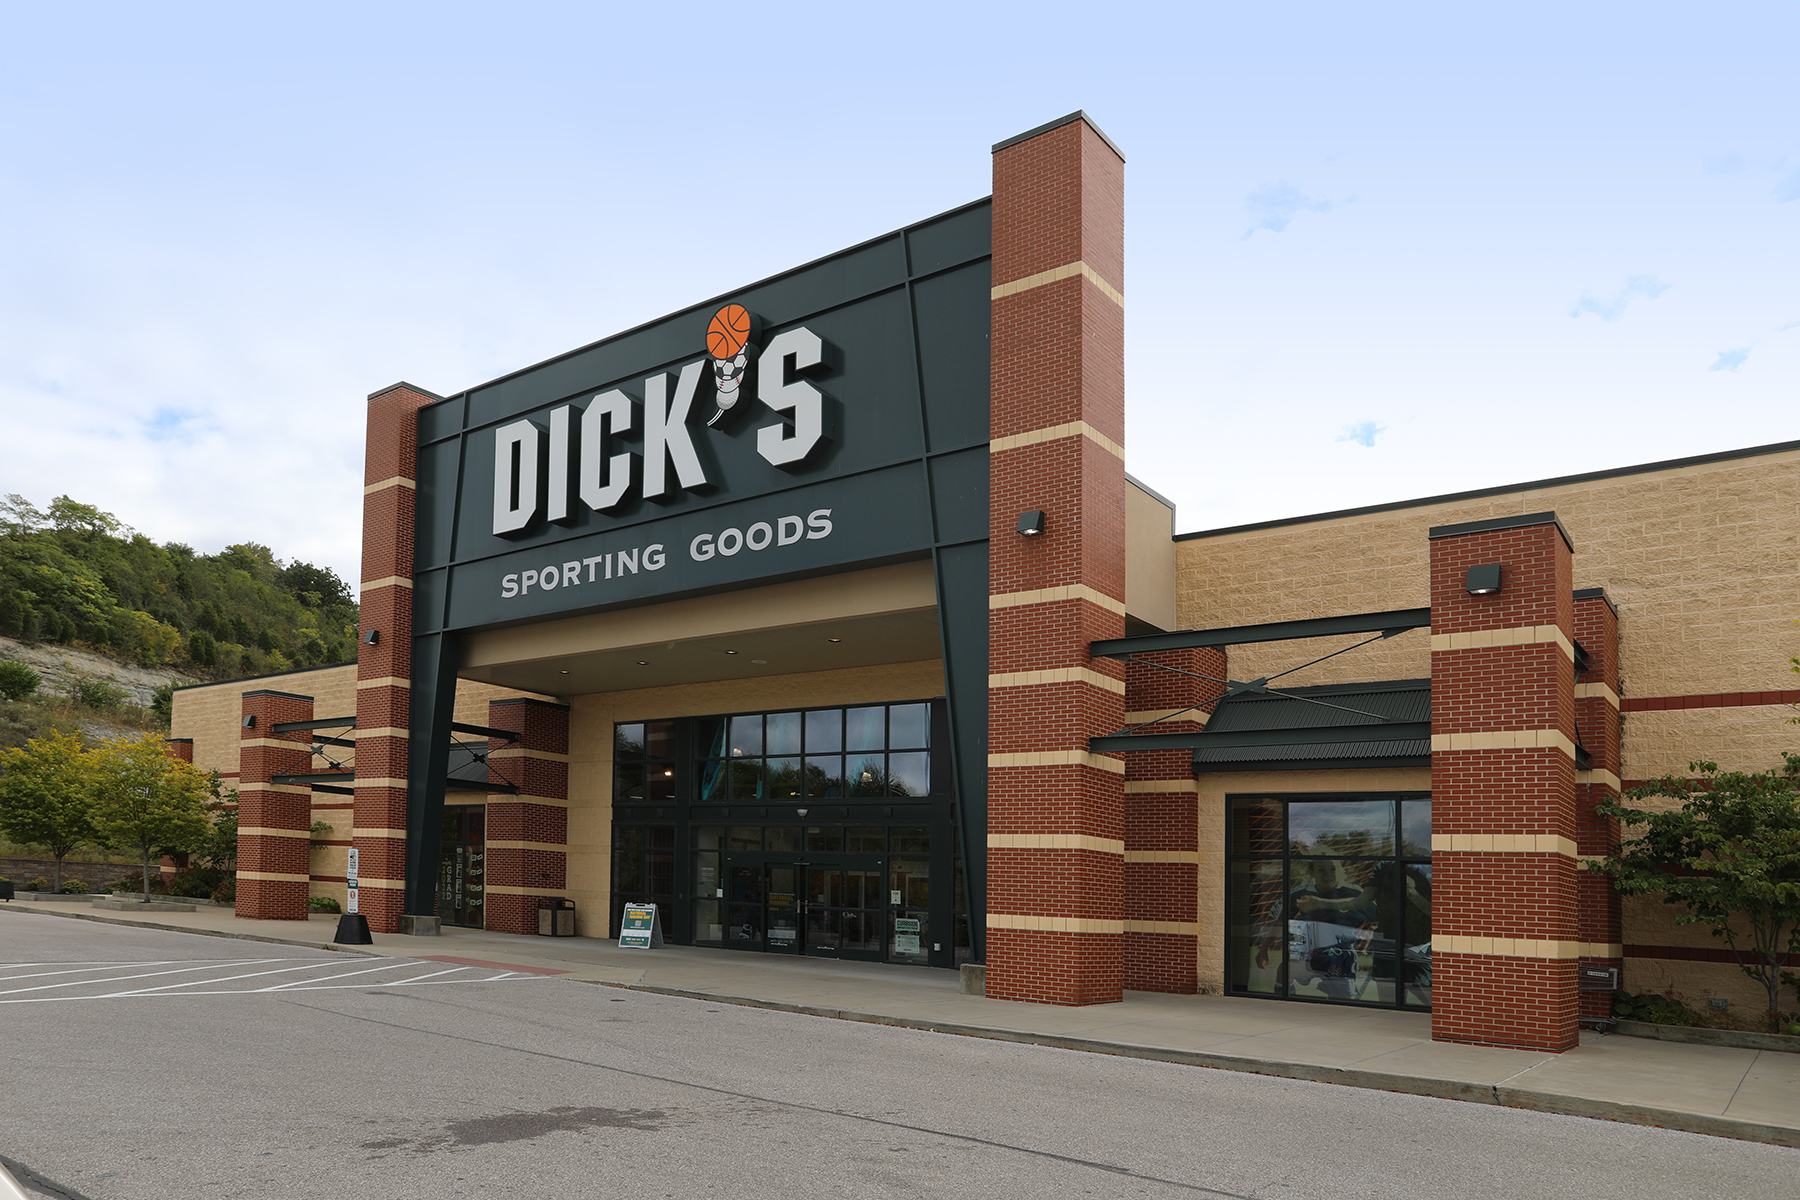 A Dick's Sporting Goods building.